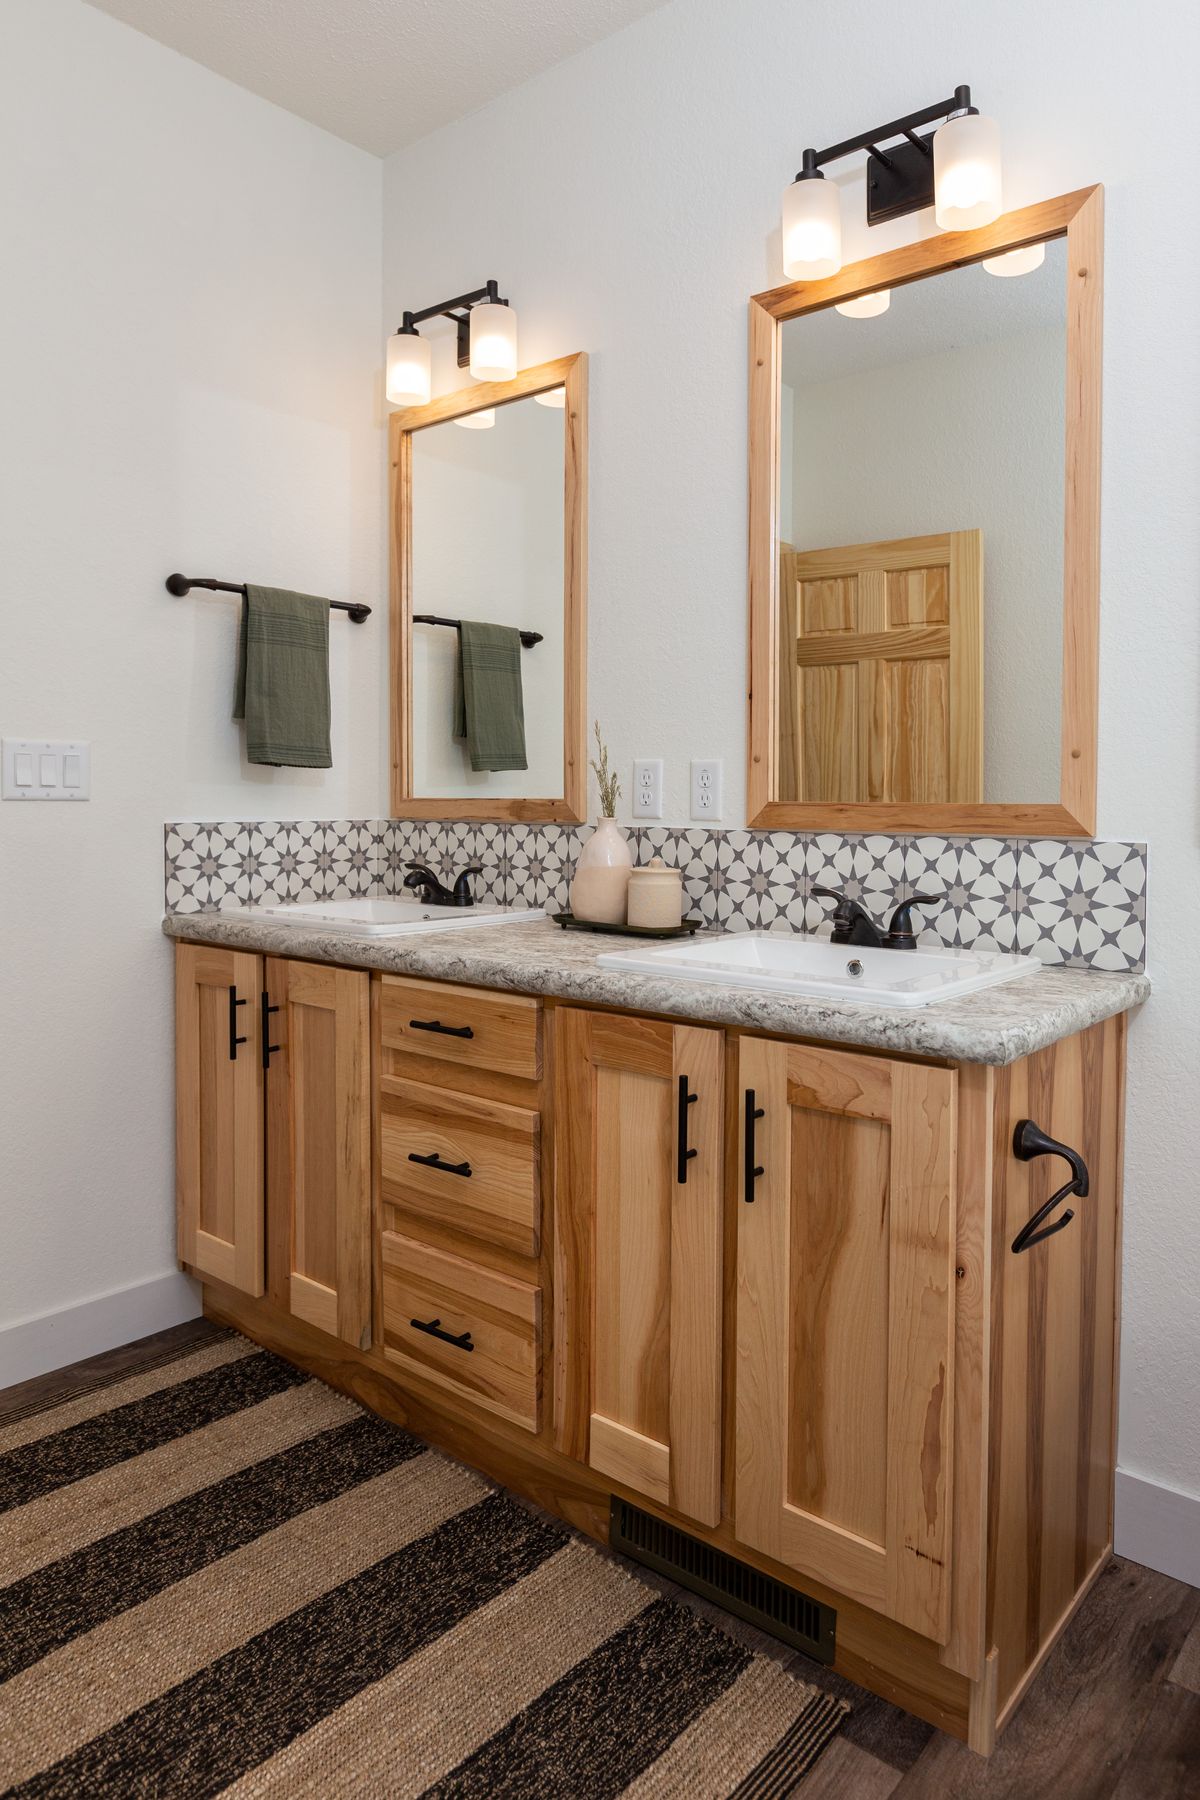 The LEGACY 412 Primary Bathroom. This Manufactured Mobile Home features 3 bedrooms and 2 baths.